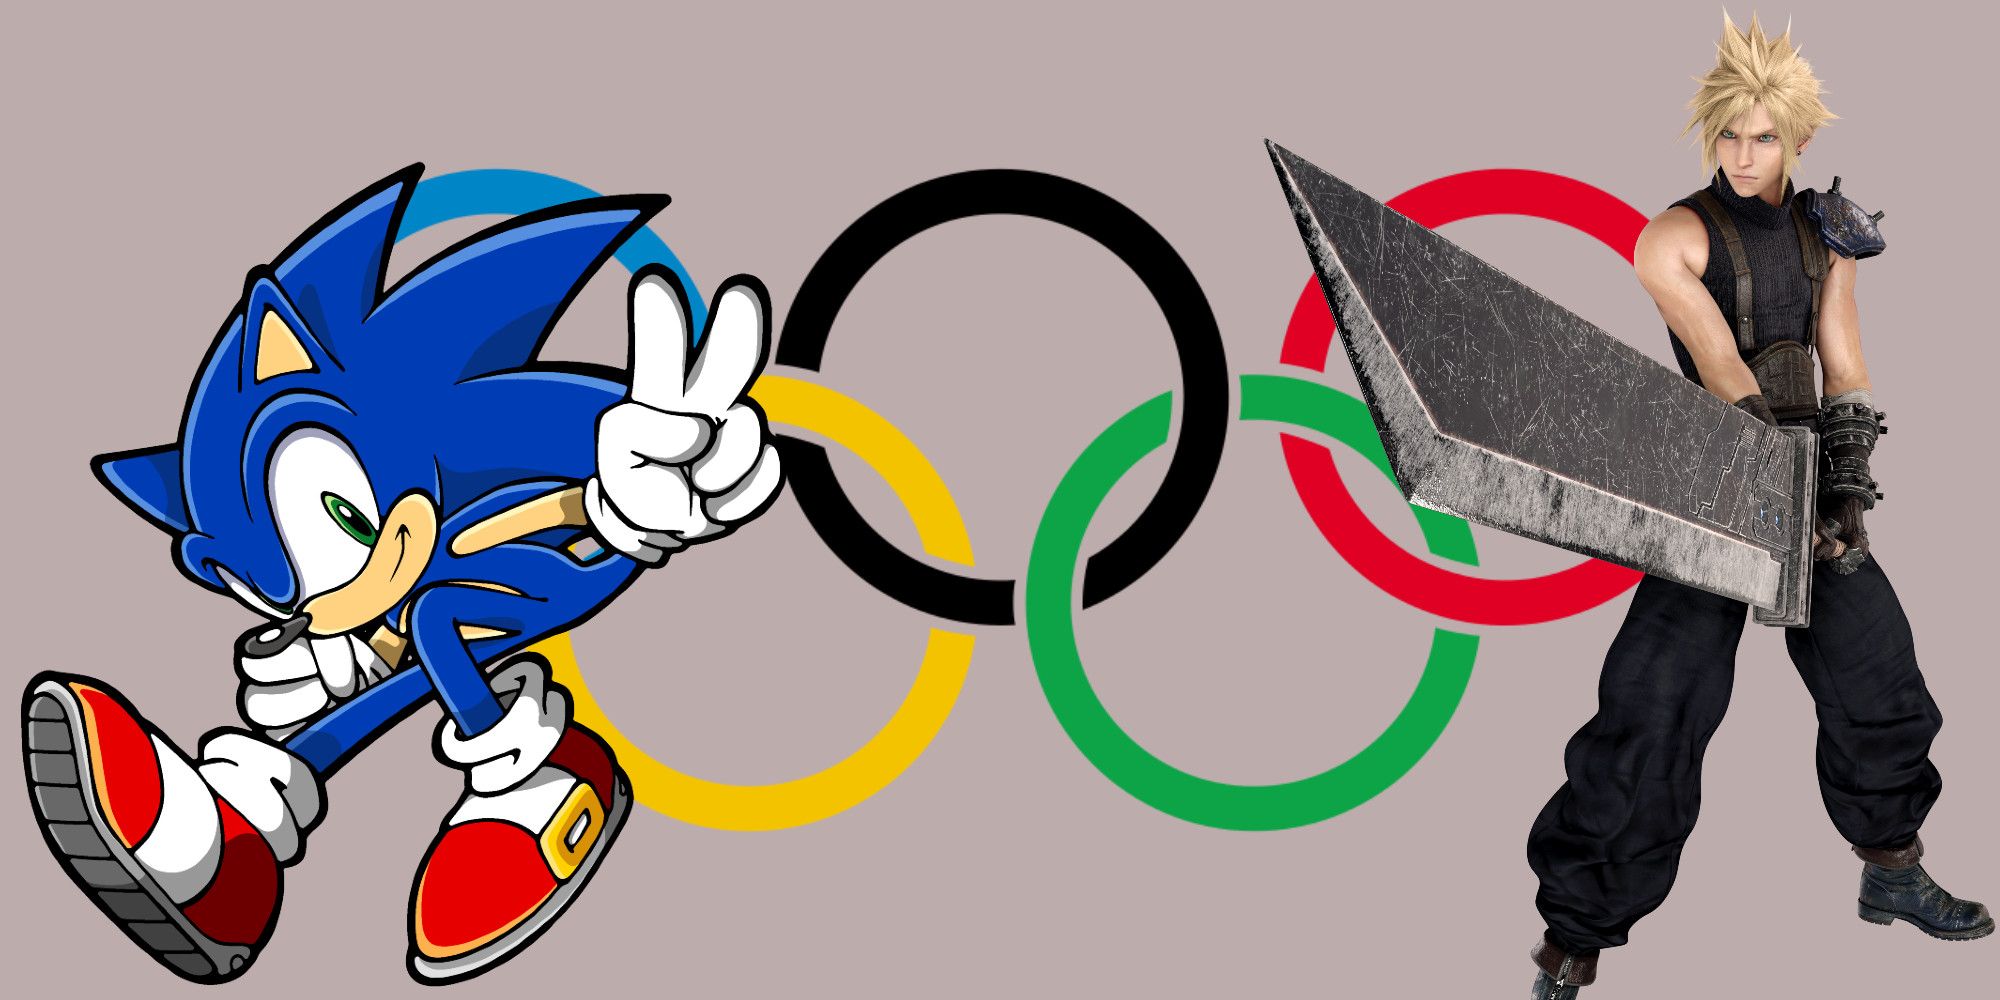 Sonic and Cloud Strife at Olympics